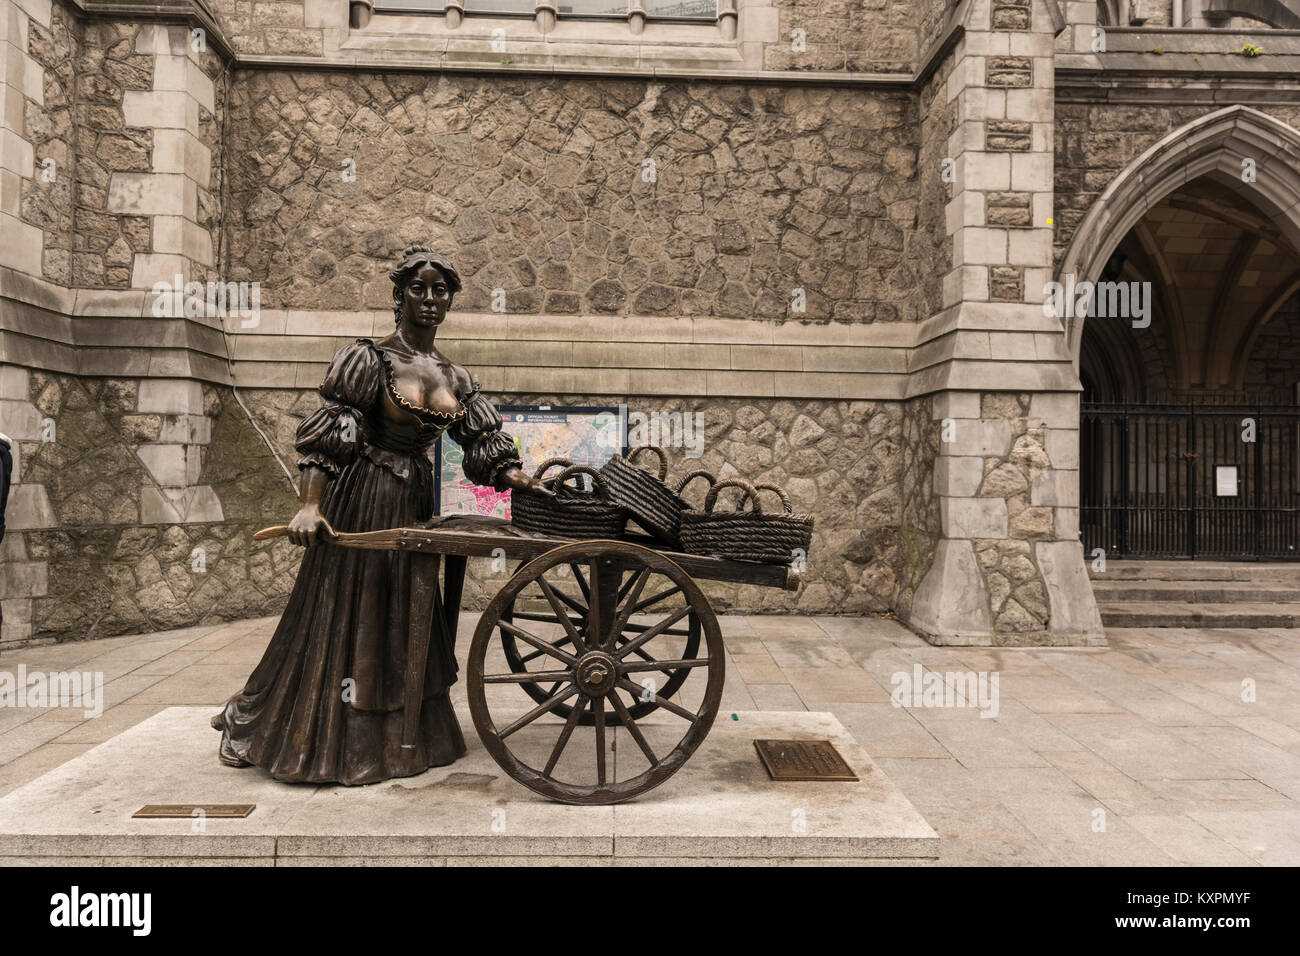 Molly Malone (aka 'The Tart with the Cart', 'The Dish with the Fish', 'The Dolly with the Trolley', 'The Trollop with the Scallops'). Sculpture by Jea Stock Photo